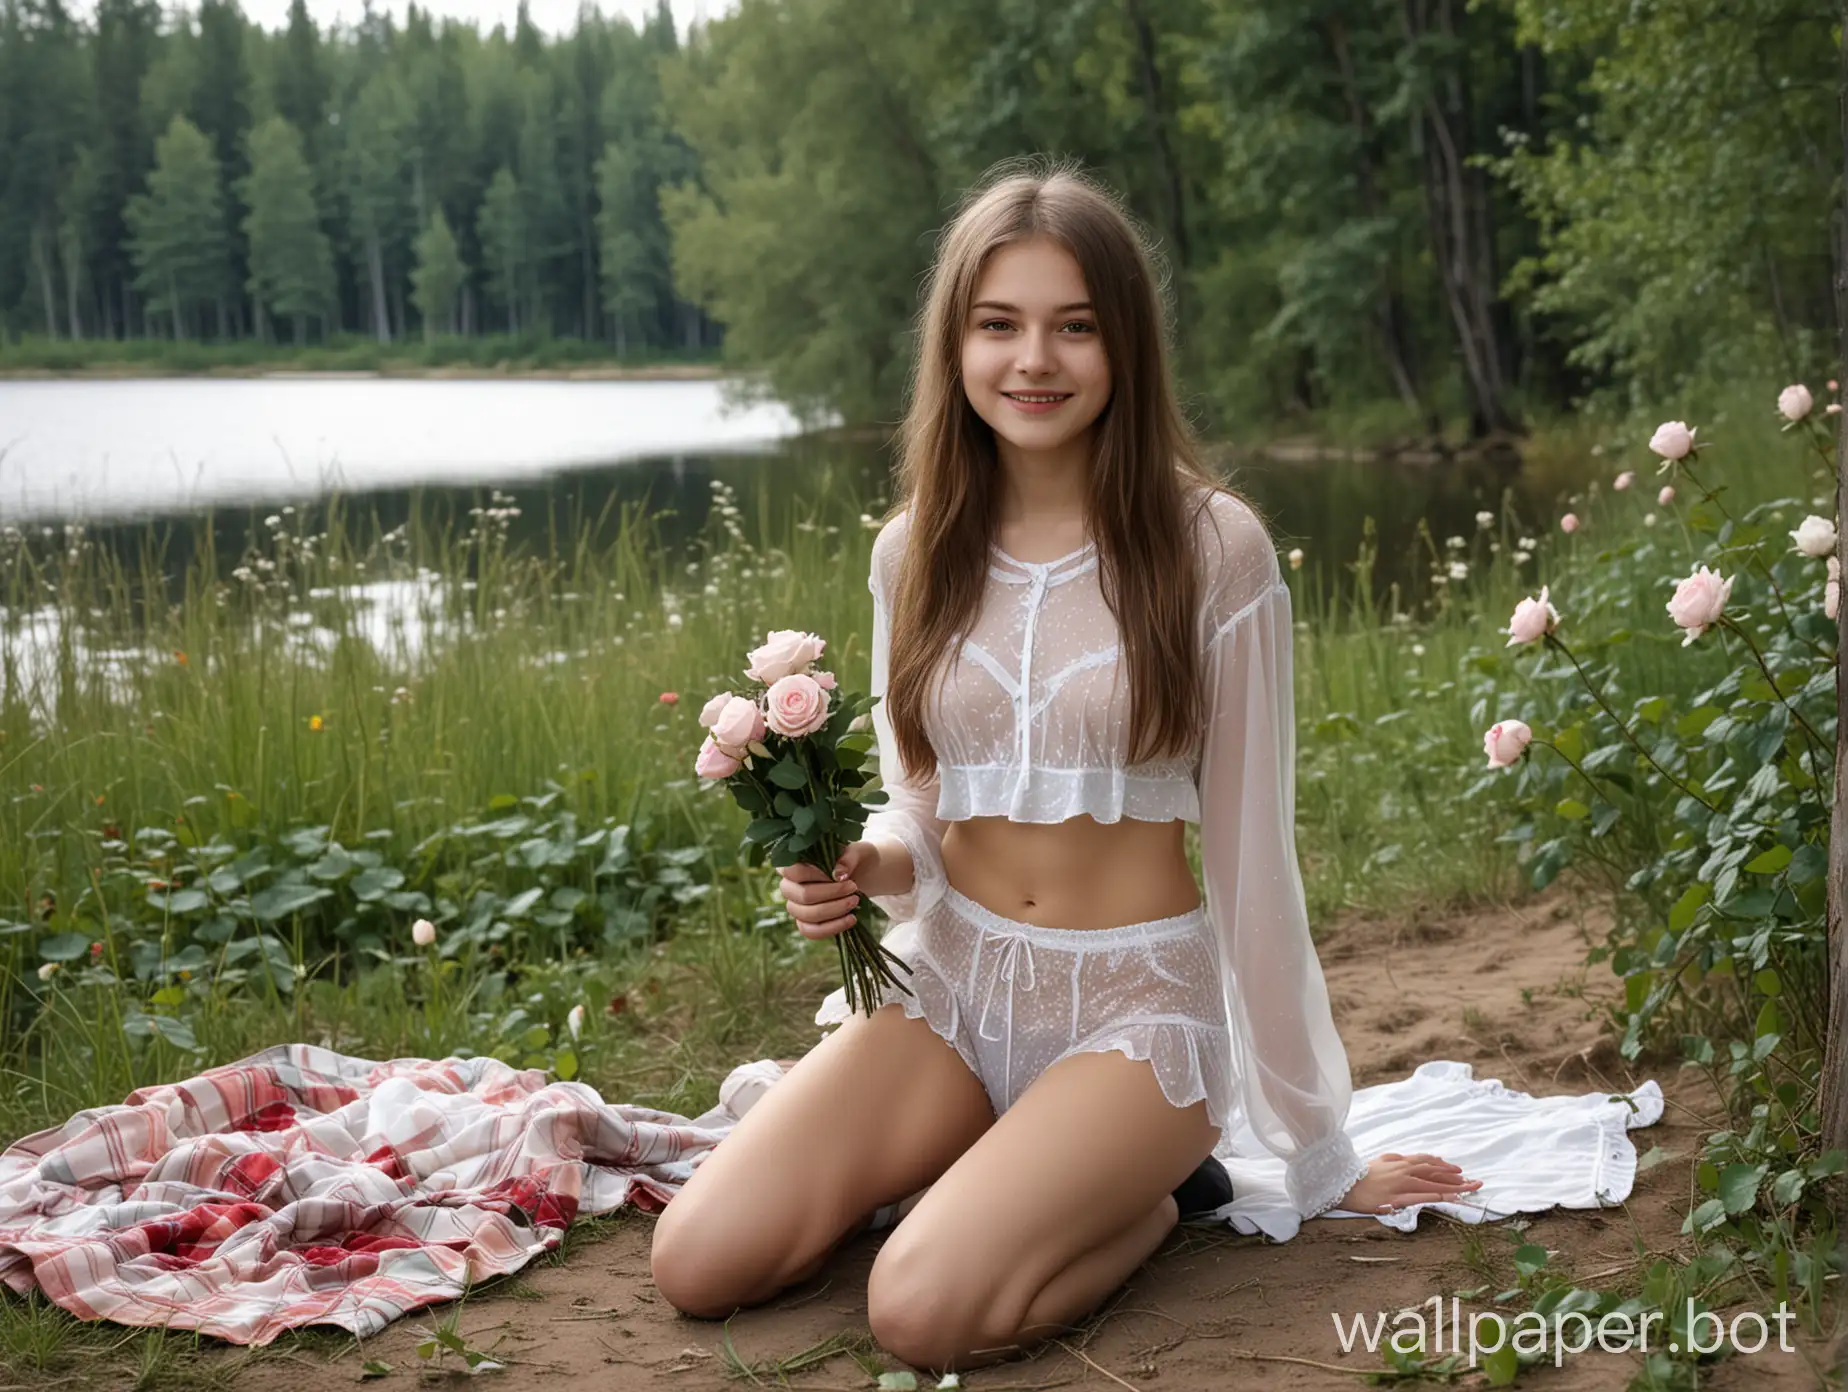 thin, Moscow girl 16 years old, translucent underwear, in dark knee-highs, picnic in the taiga by the lake, with a bouquet of roses, first date, winking